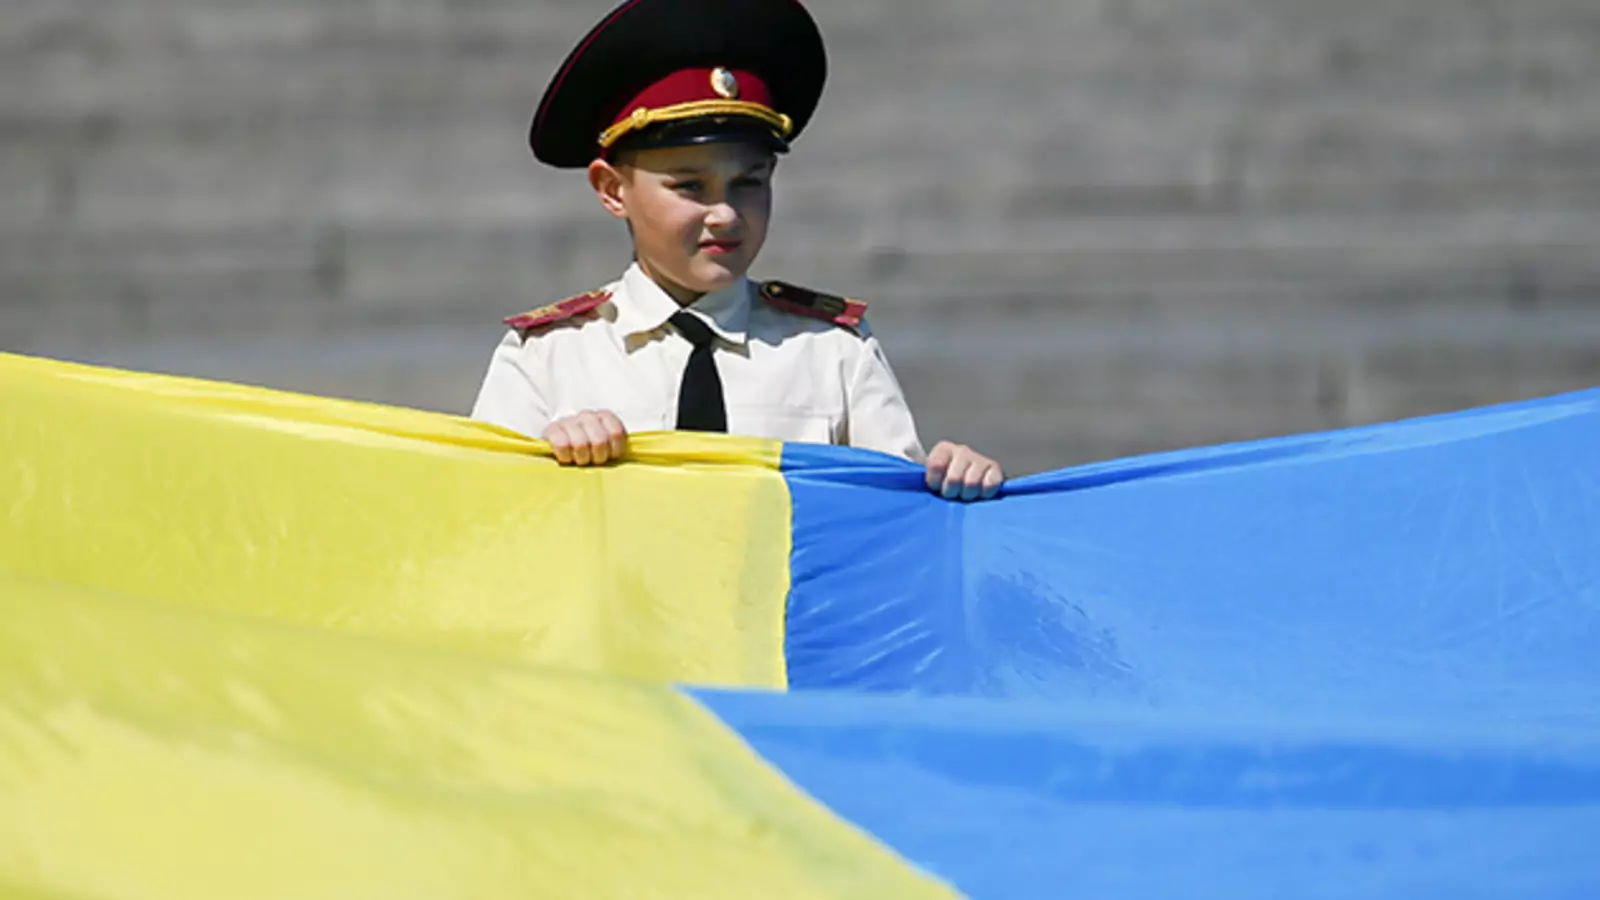 A cadet takes part in a ceremony dedicated to the anniversary of World War II in Kiev.